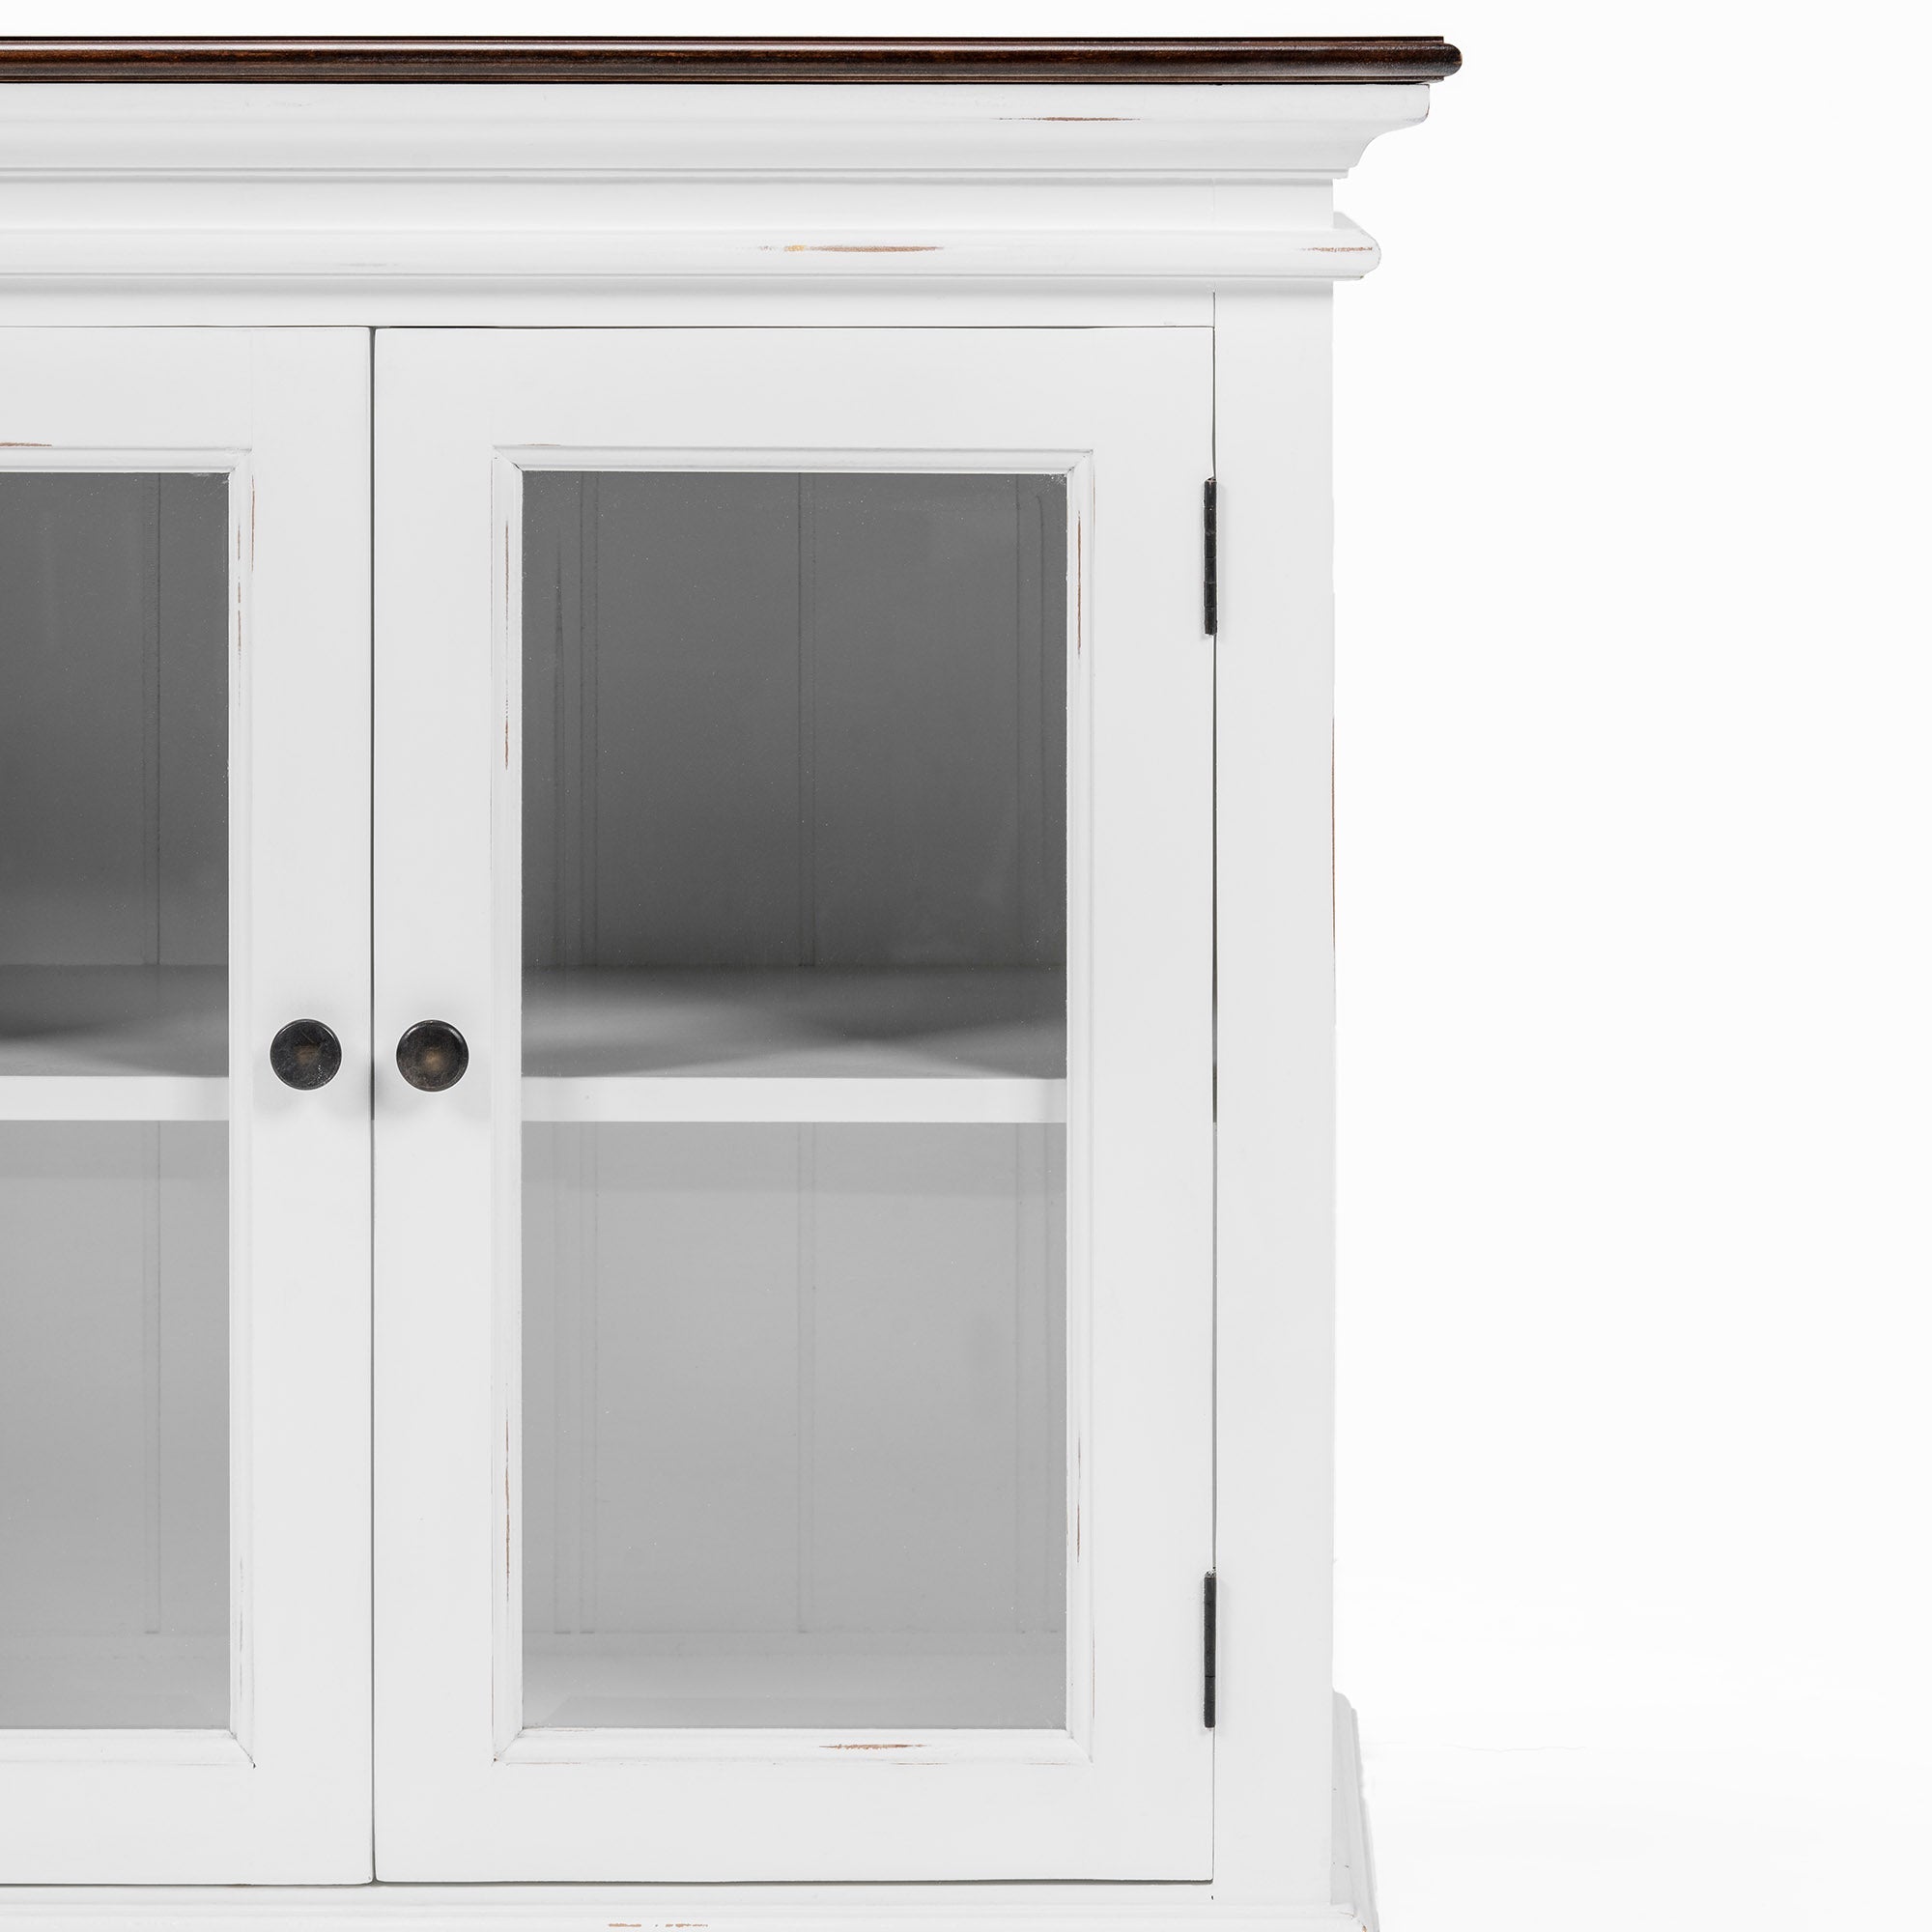 Halifax Accent Coastal White & Brown Display Buffet with 4 Glass Doors